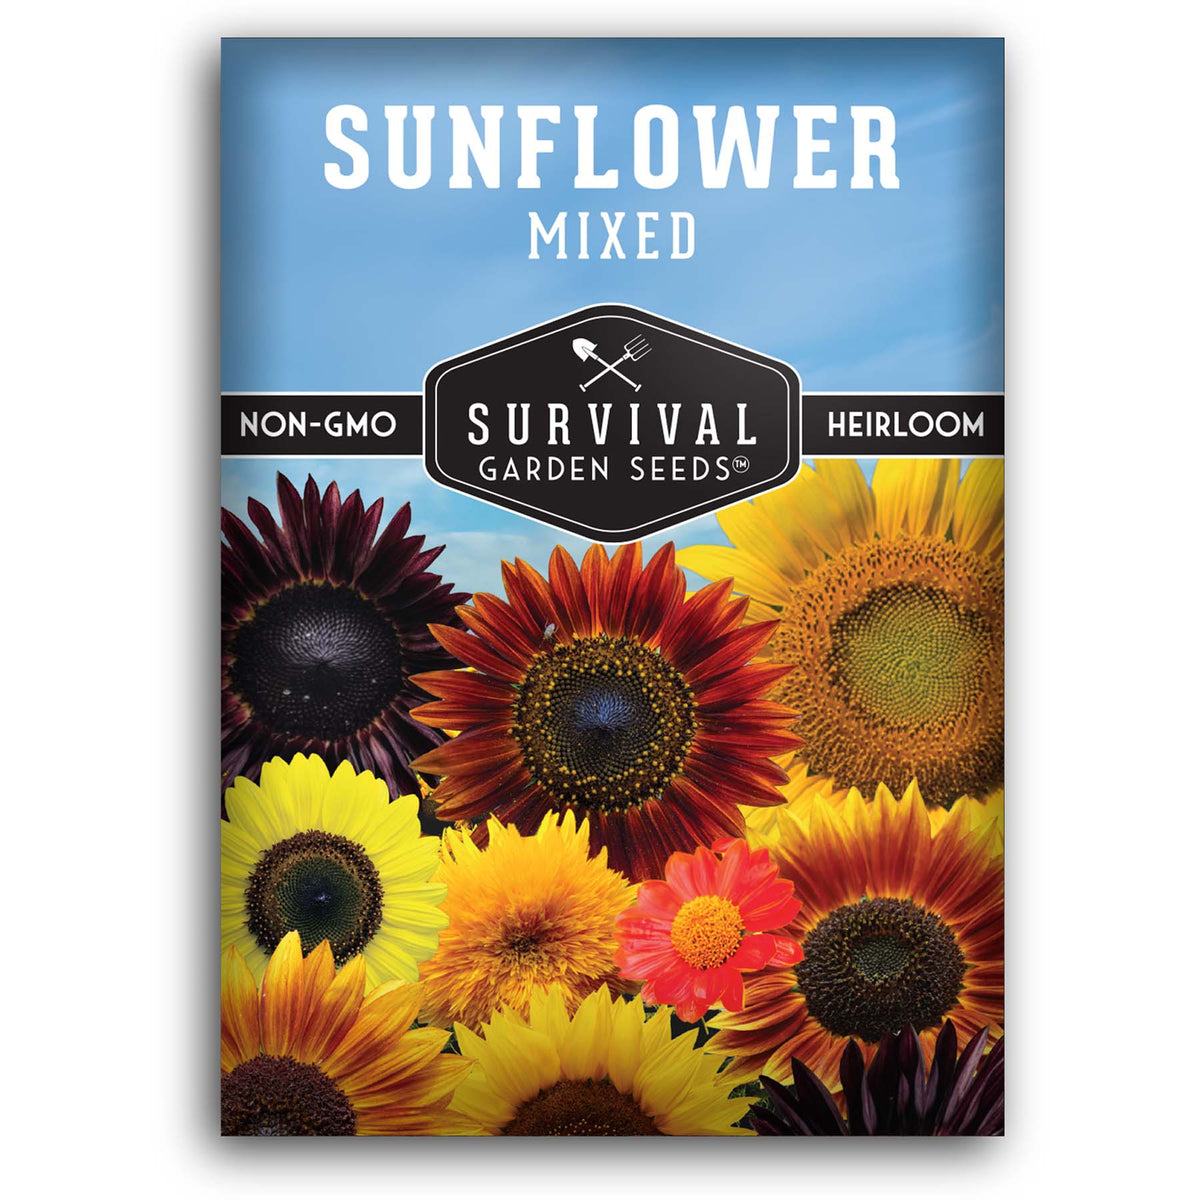 Mixed Sunflower seeds for planting